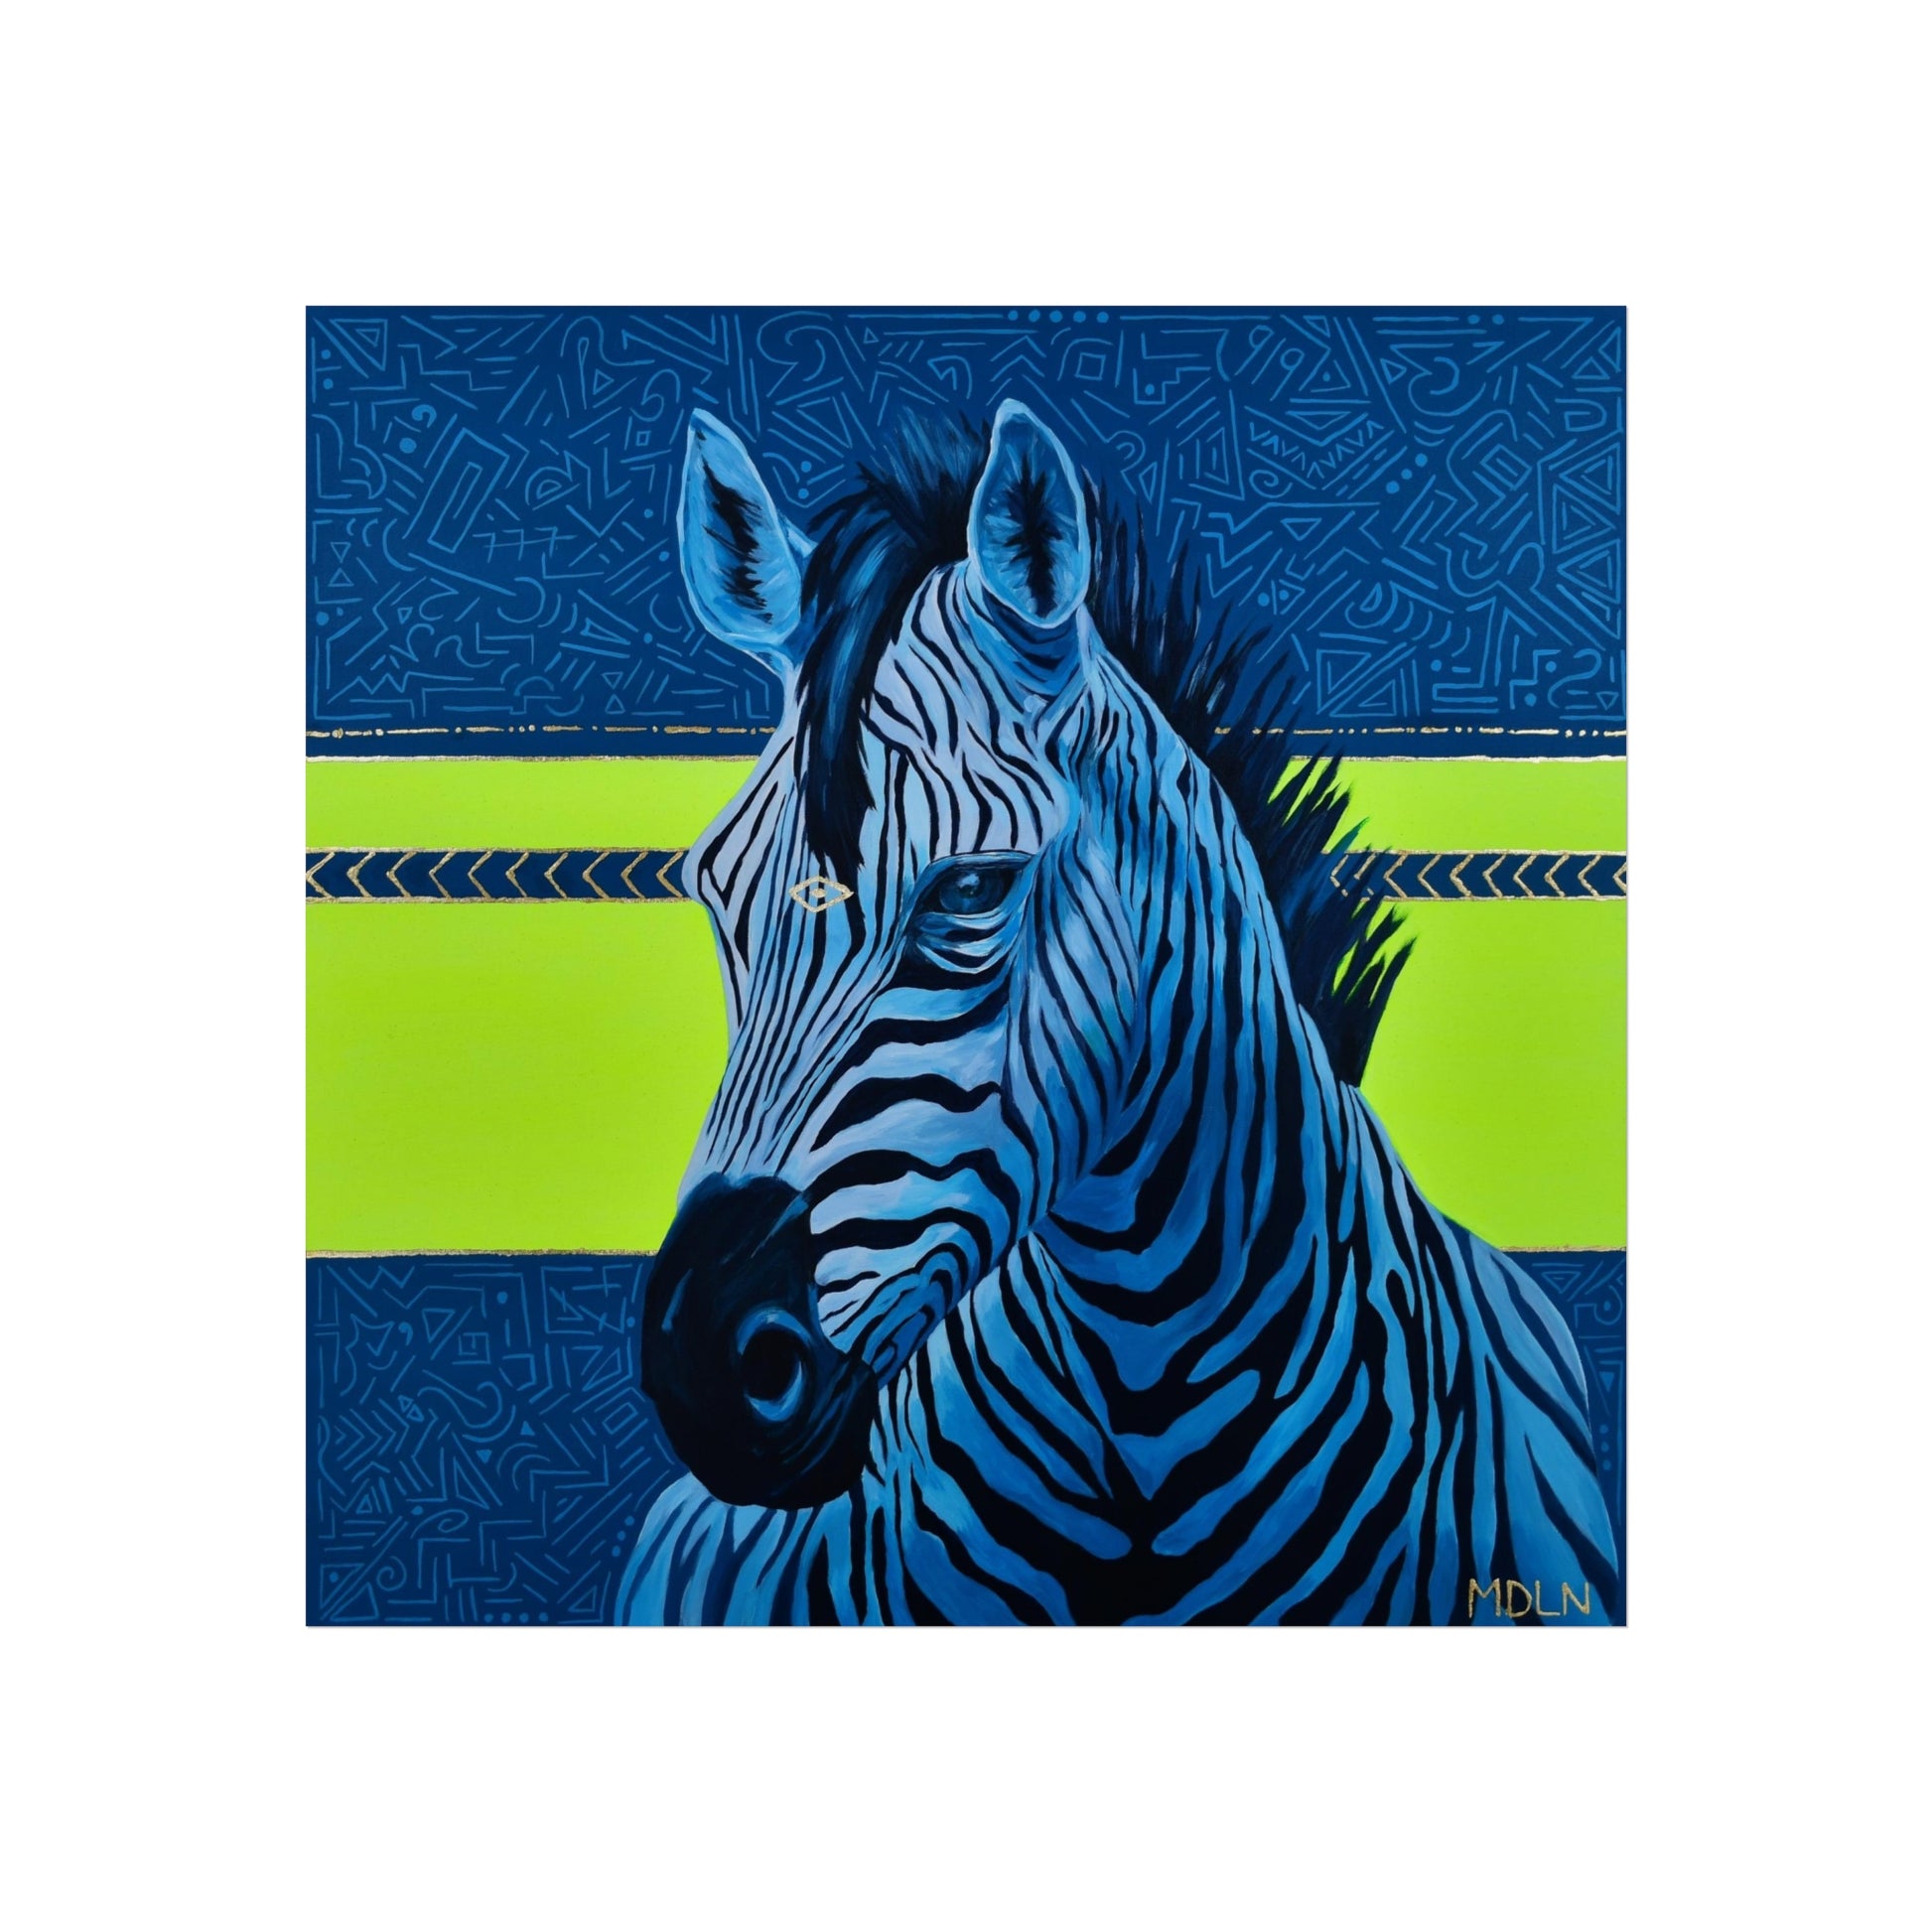 A beautiful bright and bold giclee art print of a majestic zebra painting with blue and neon yellow abstract background, zebra art